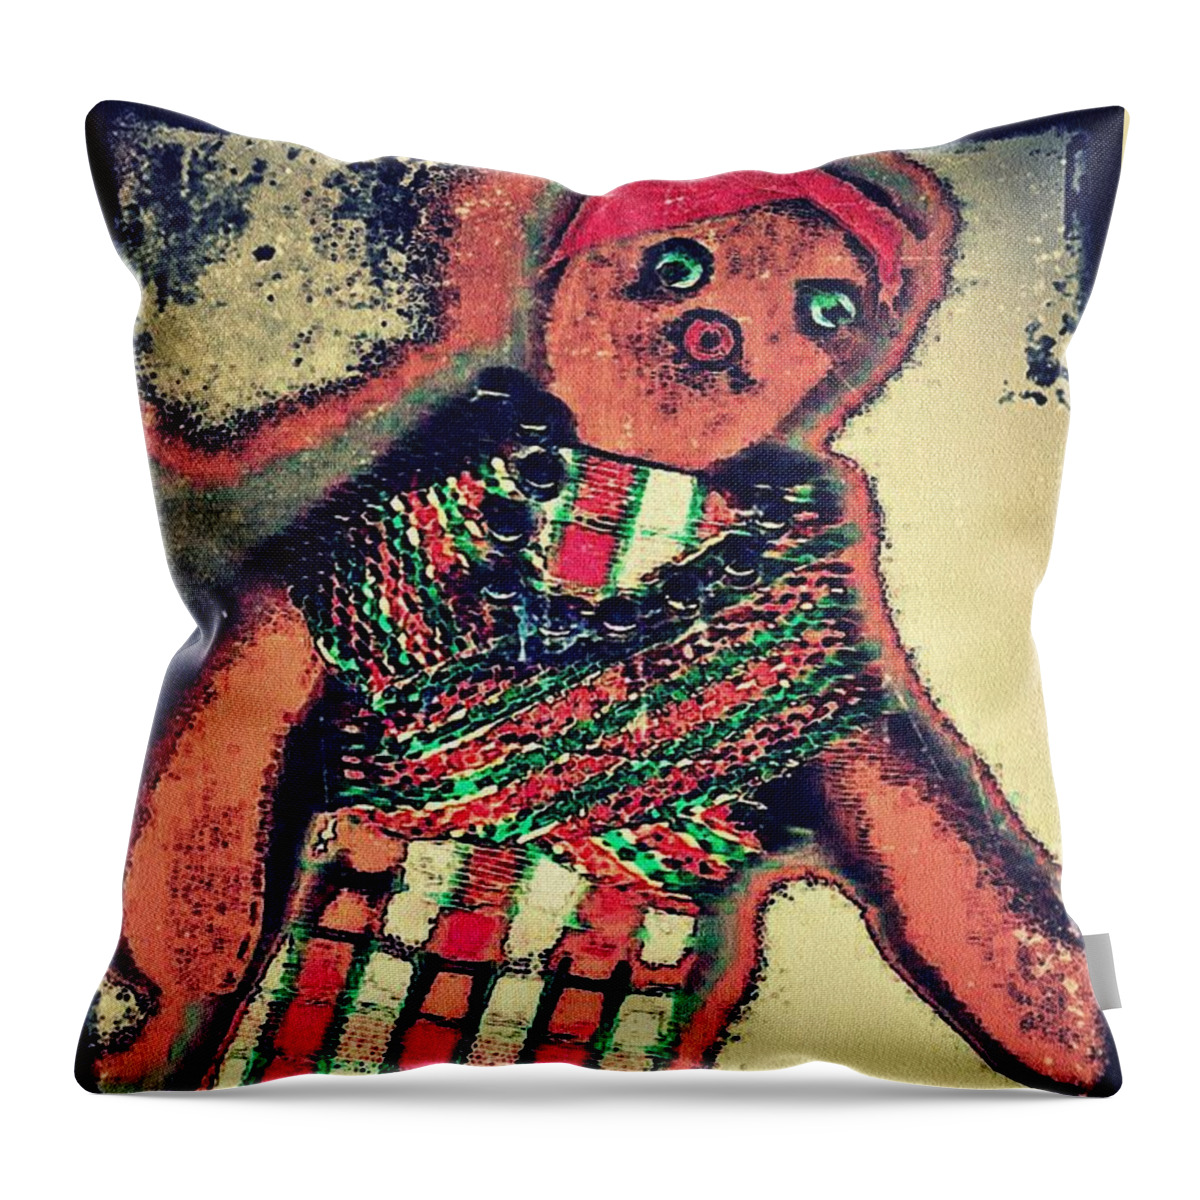 Doll Throw Pillow featuring the digital art Old Doll by Sarah Loft